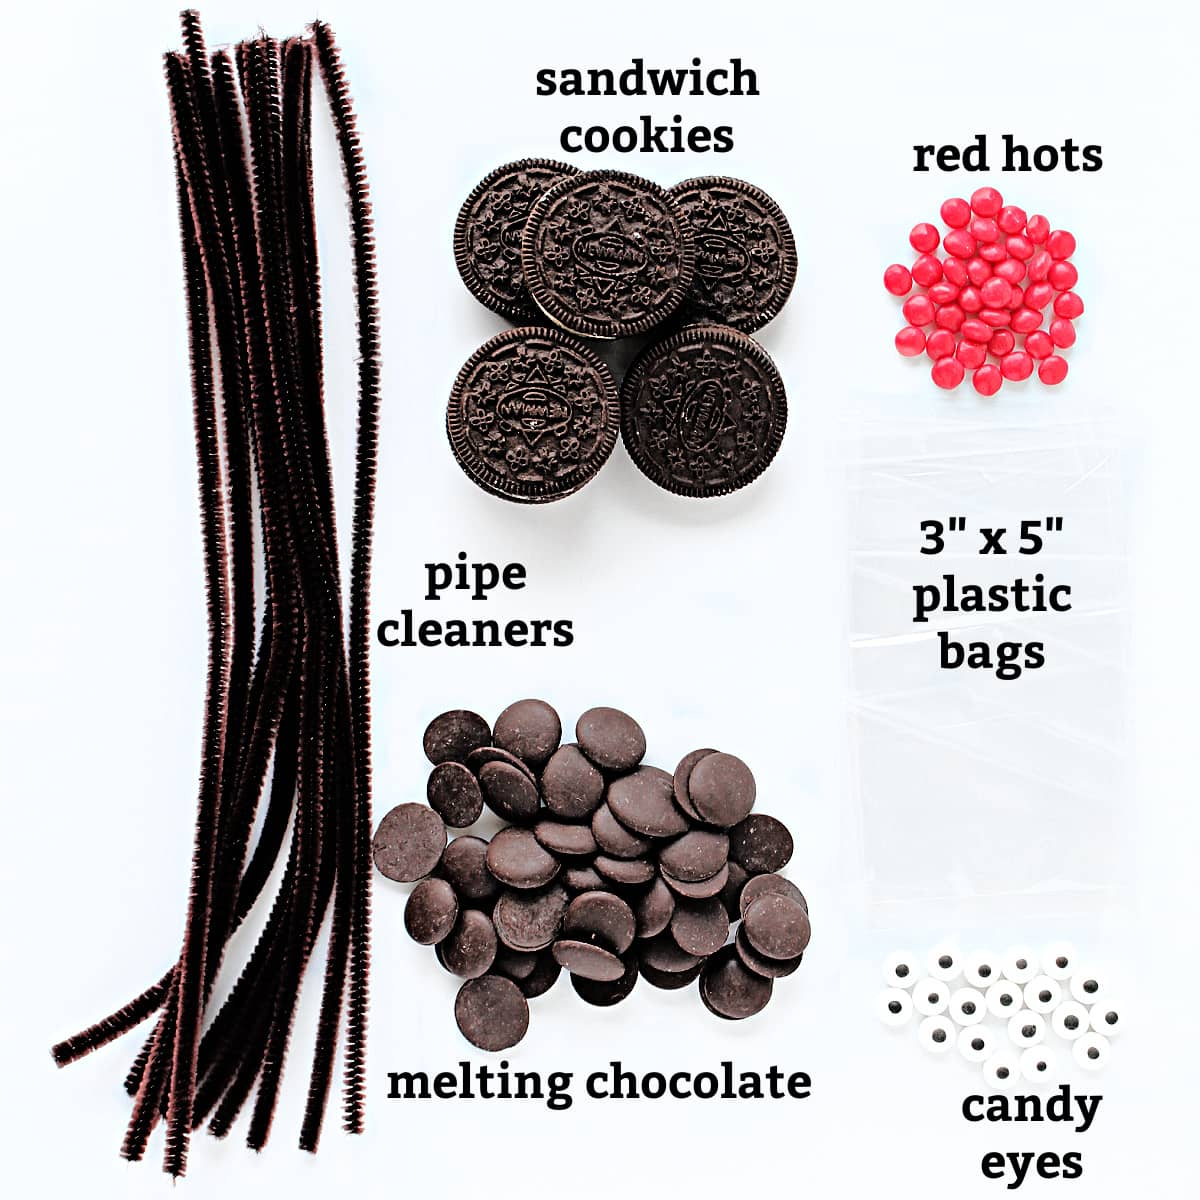 Ingredients: brown pipe cleaners, Oreos, red hots, melting chocolate, candy eyes, 3" x 5" plastic bags.